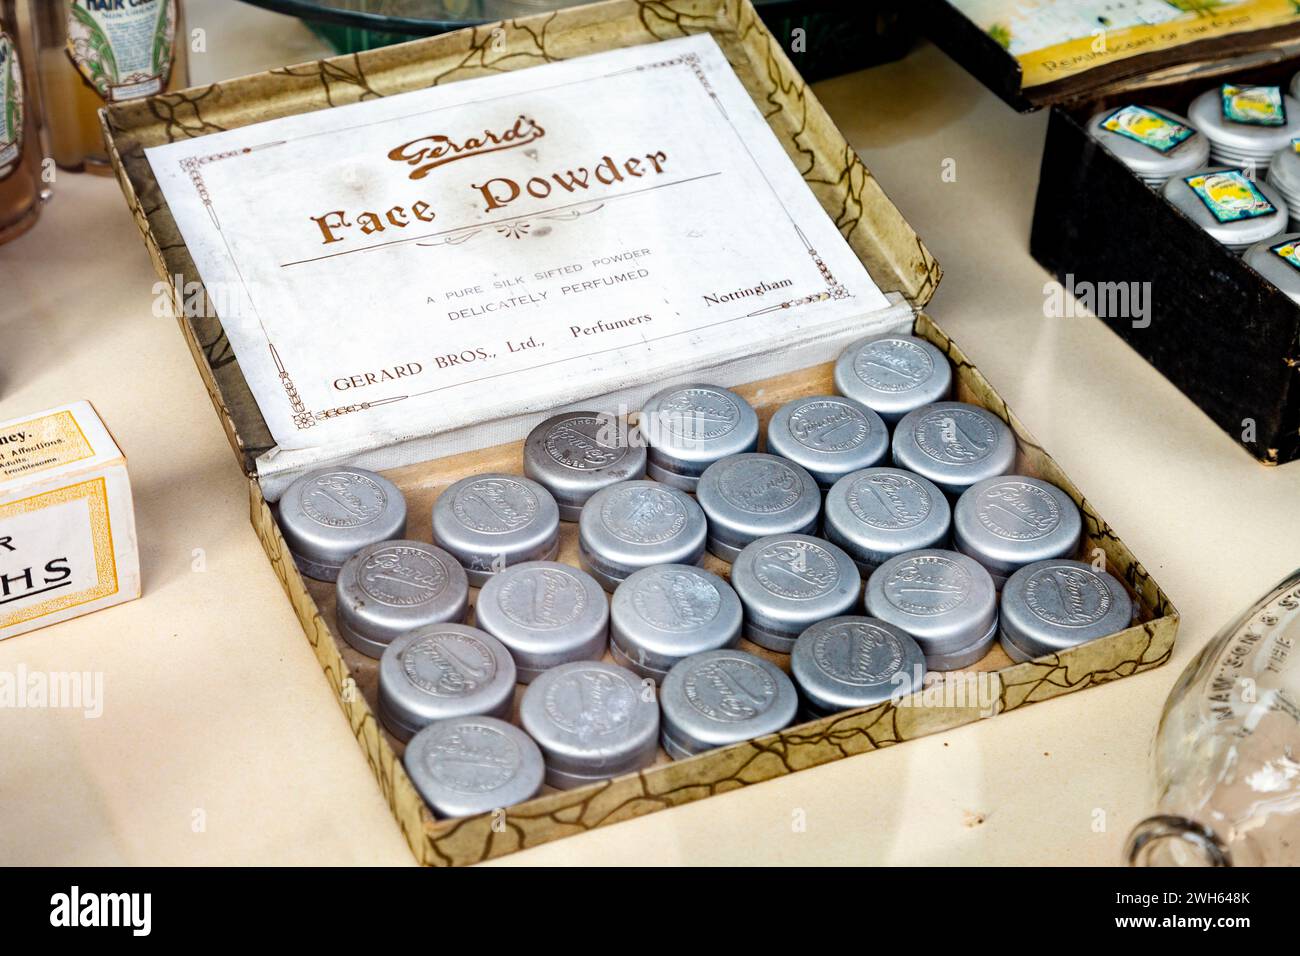 Vintage Gerard's Face Powder at old-fashioned Victorian chemists (Emily Doo's Chemist Shop), Black Country Living Museum, Dudley, England Stock Photo